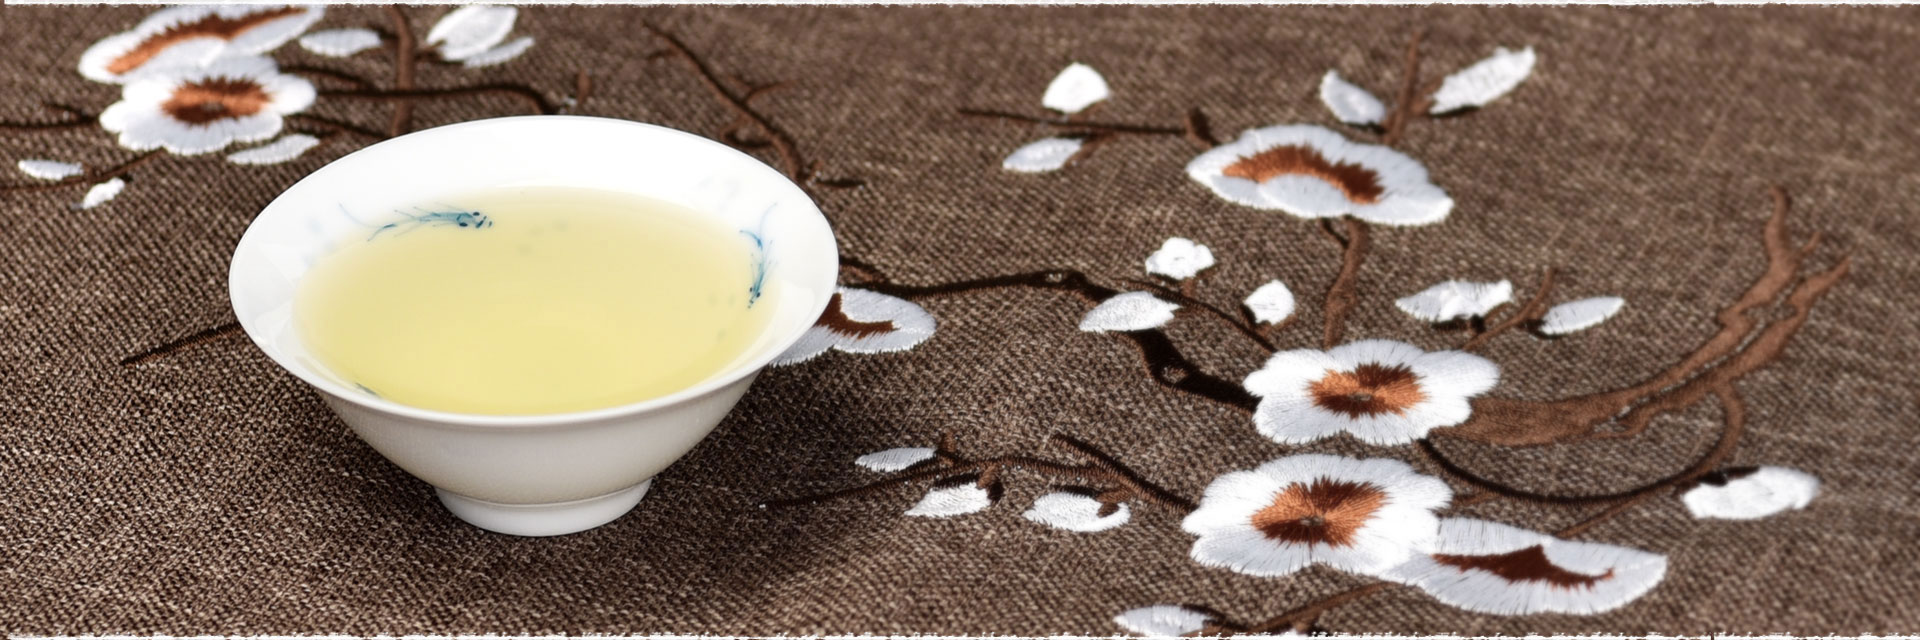 How To Choose The Best Silver Needle White Tea